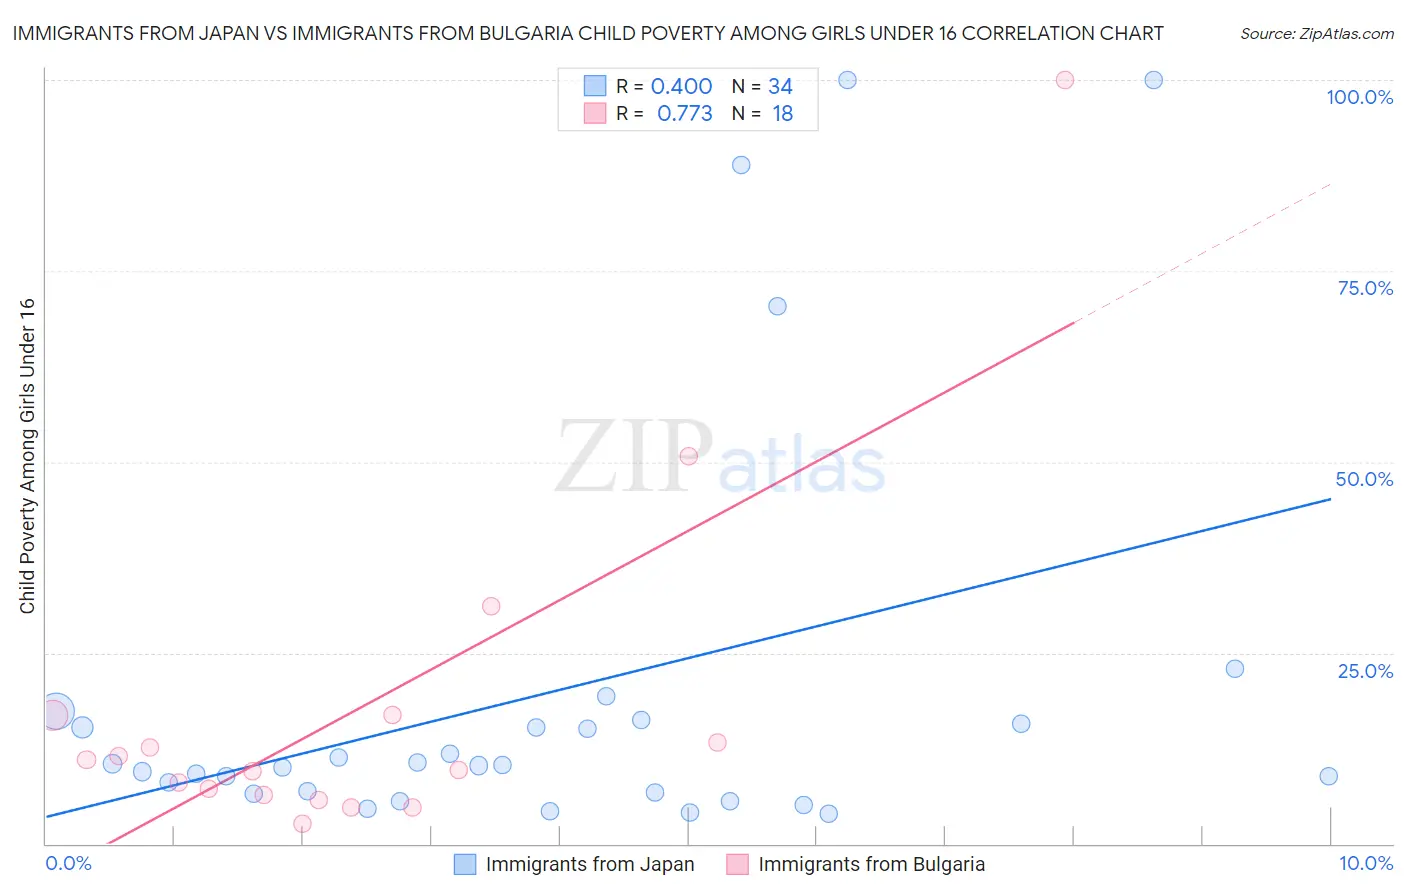 Immigrants from Japan vs Immigrants from Bulgaria Child Poverty Among Girls Under 16